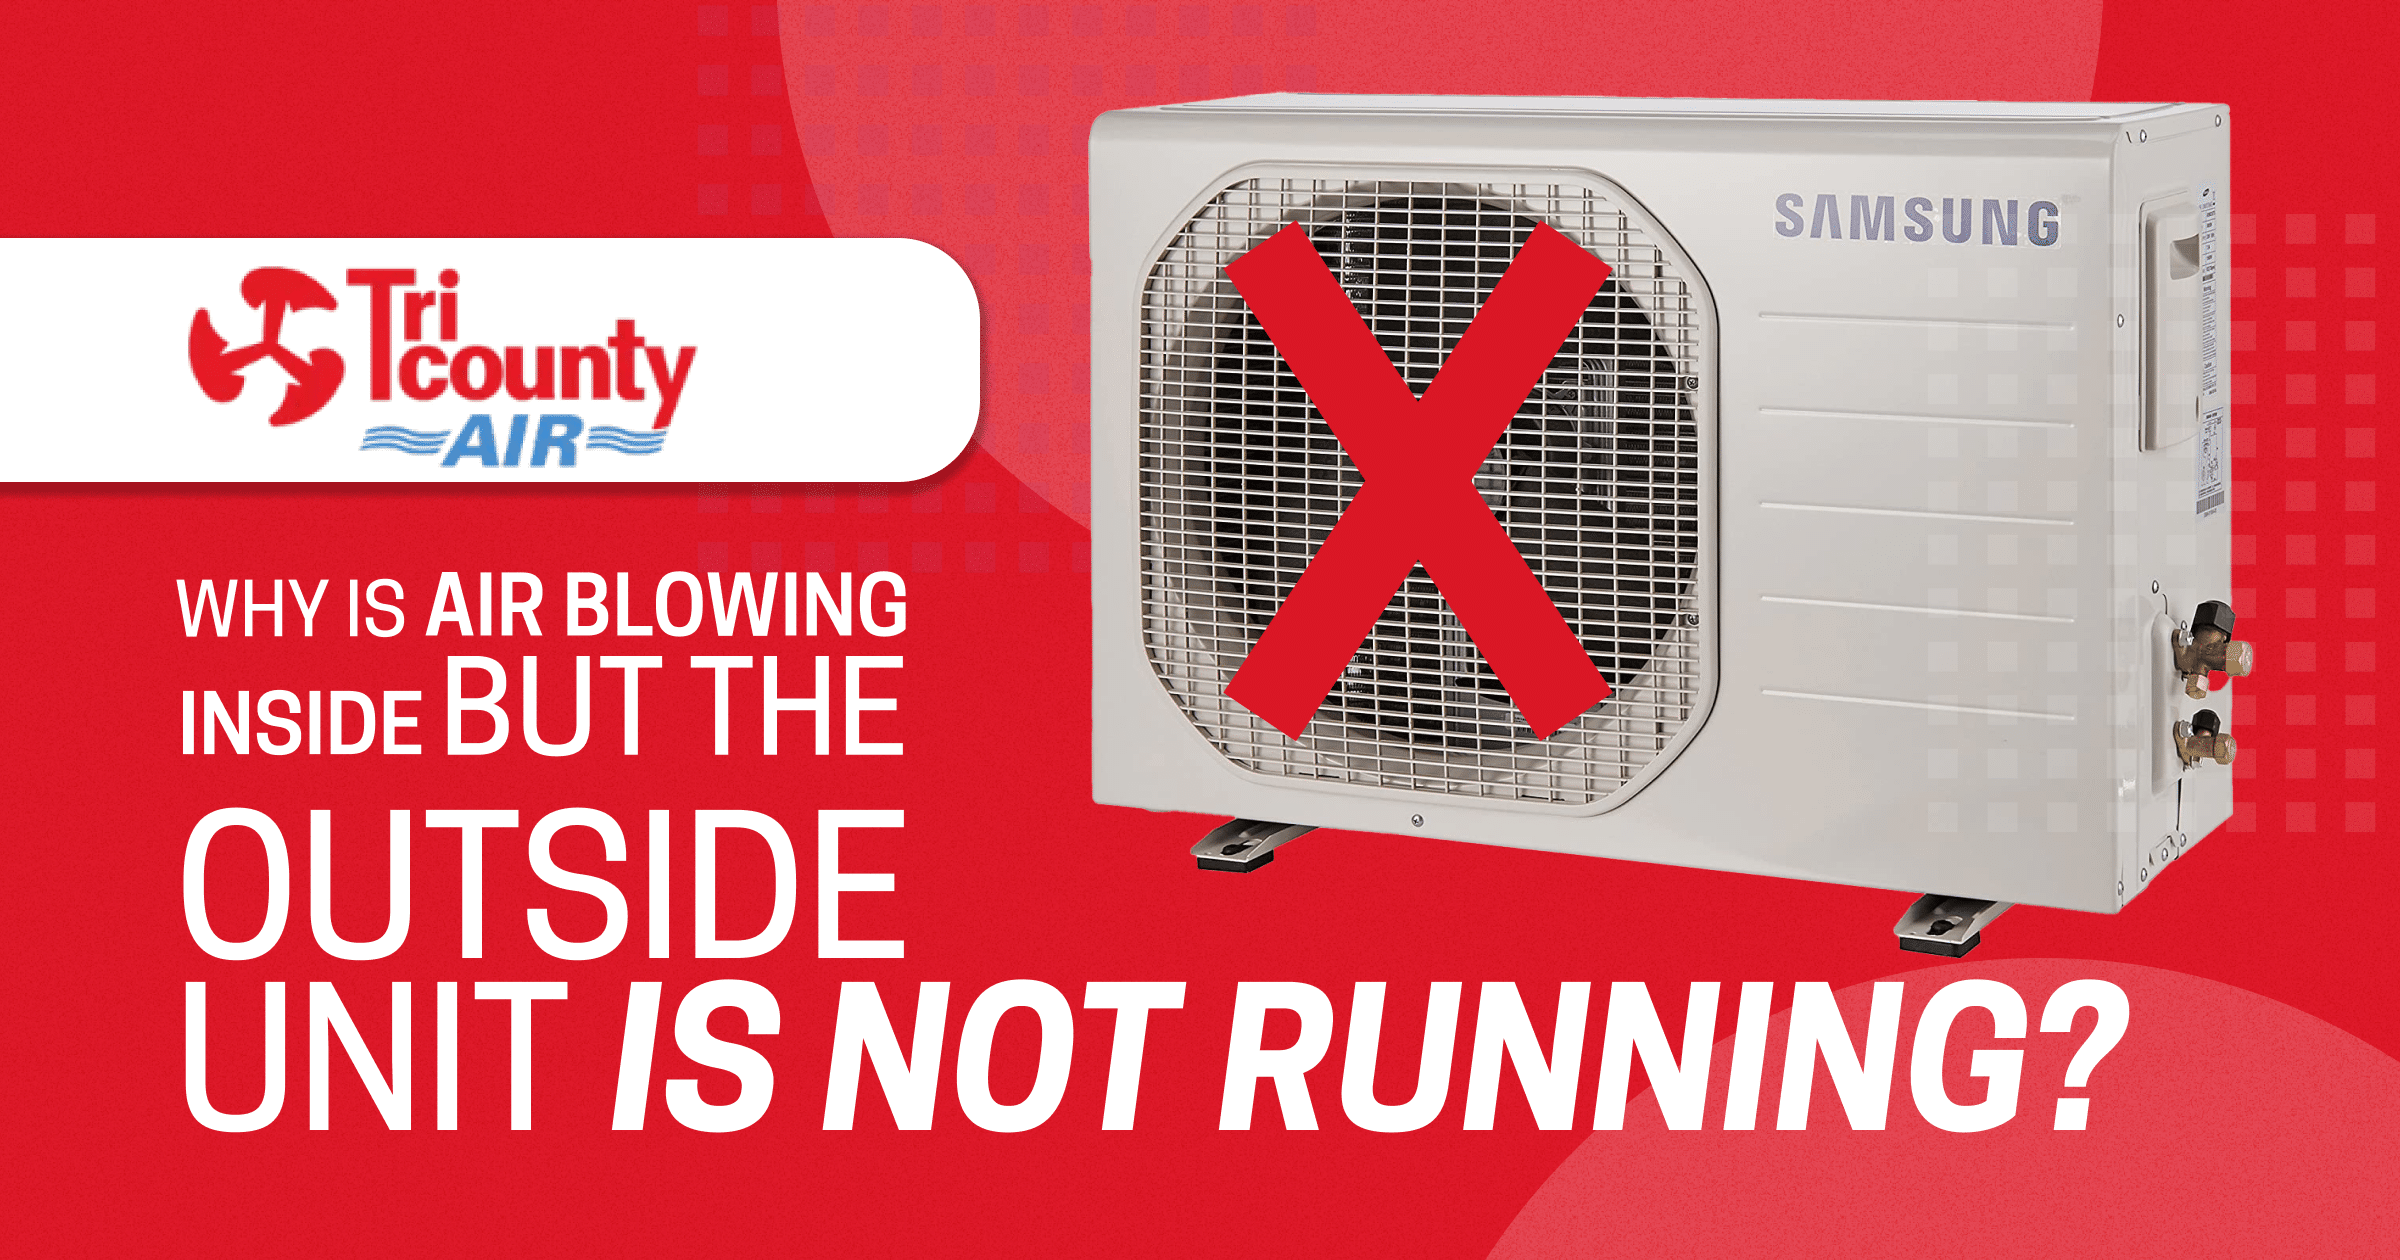 Why Is Air Blowing Inside But the Outside Unit Is Not Running?